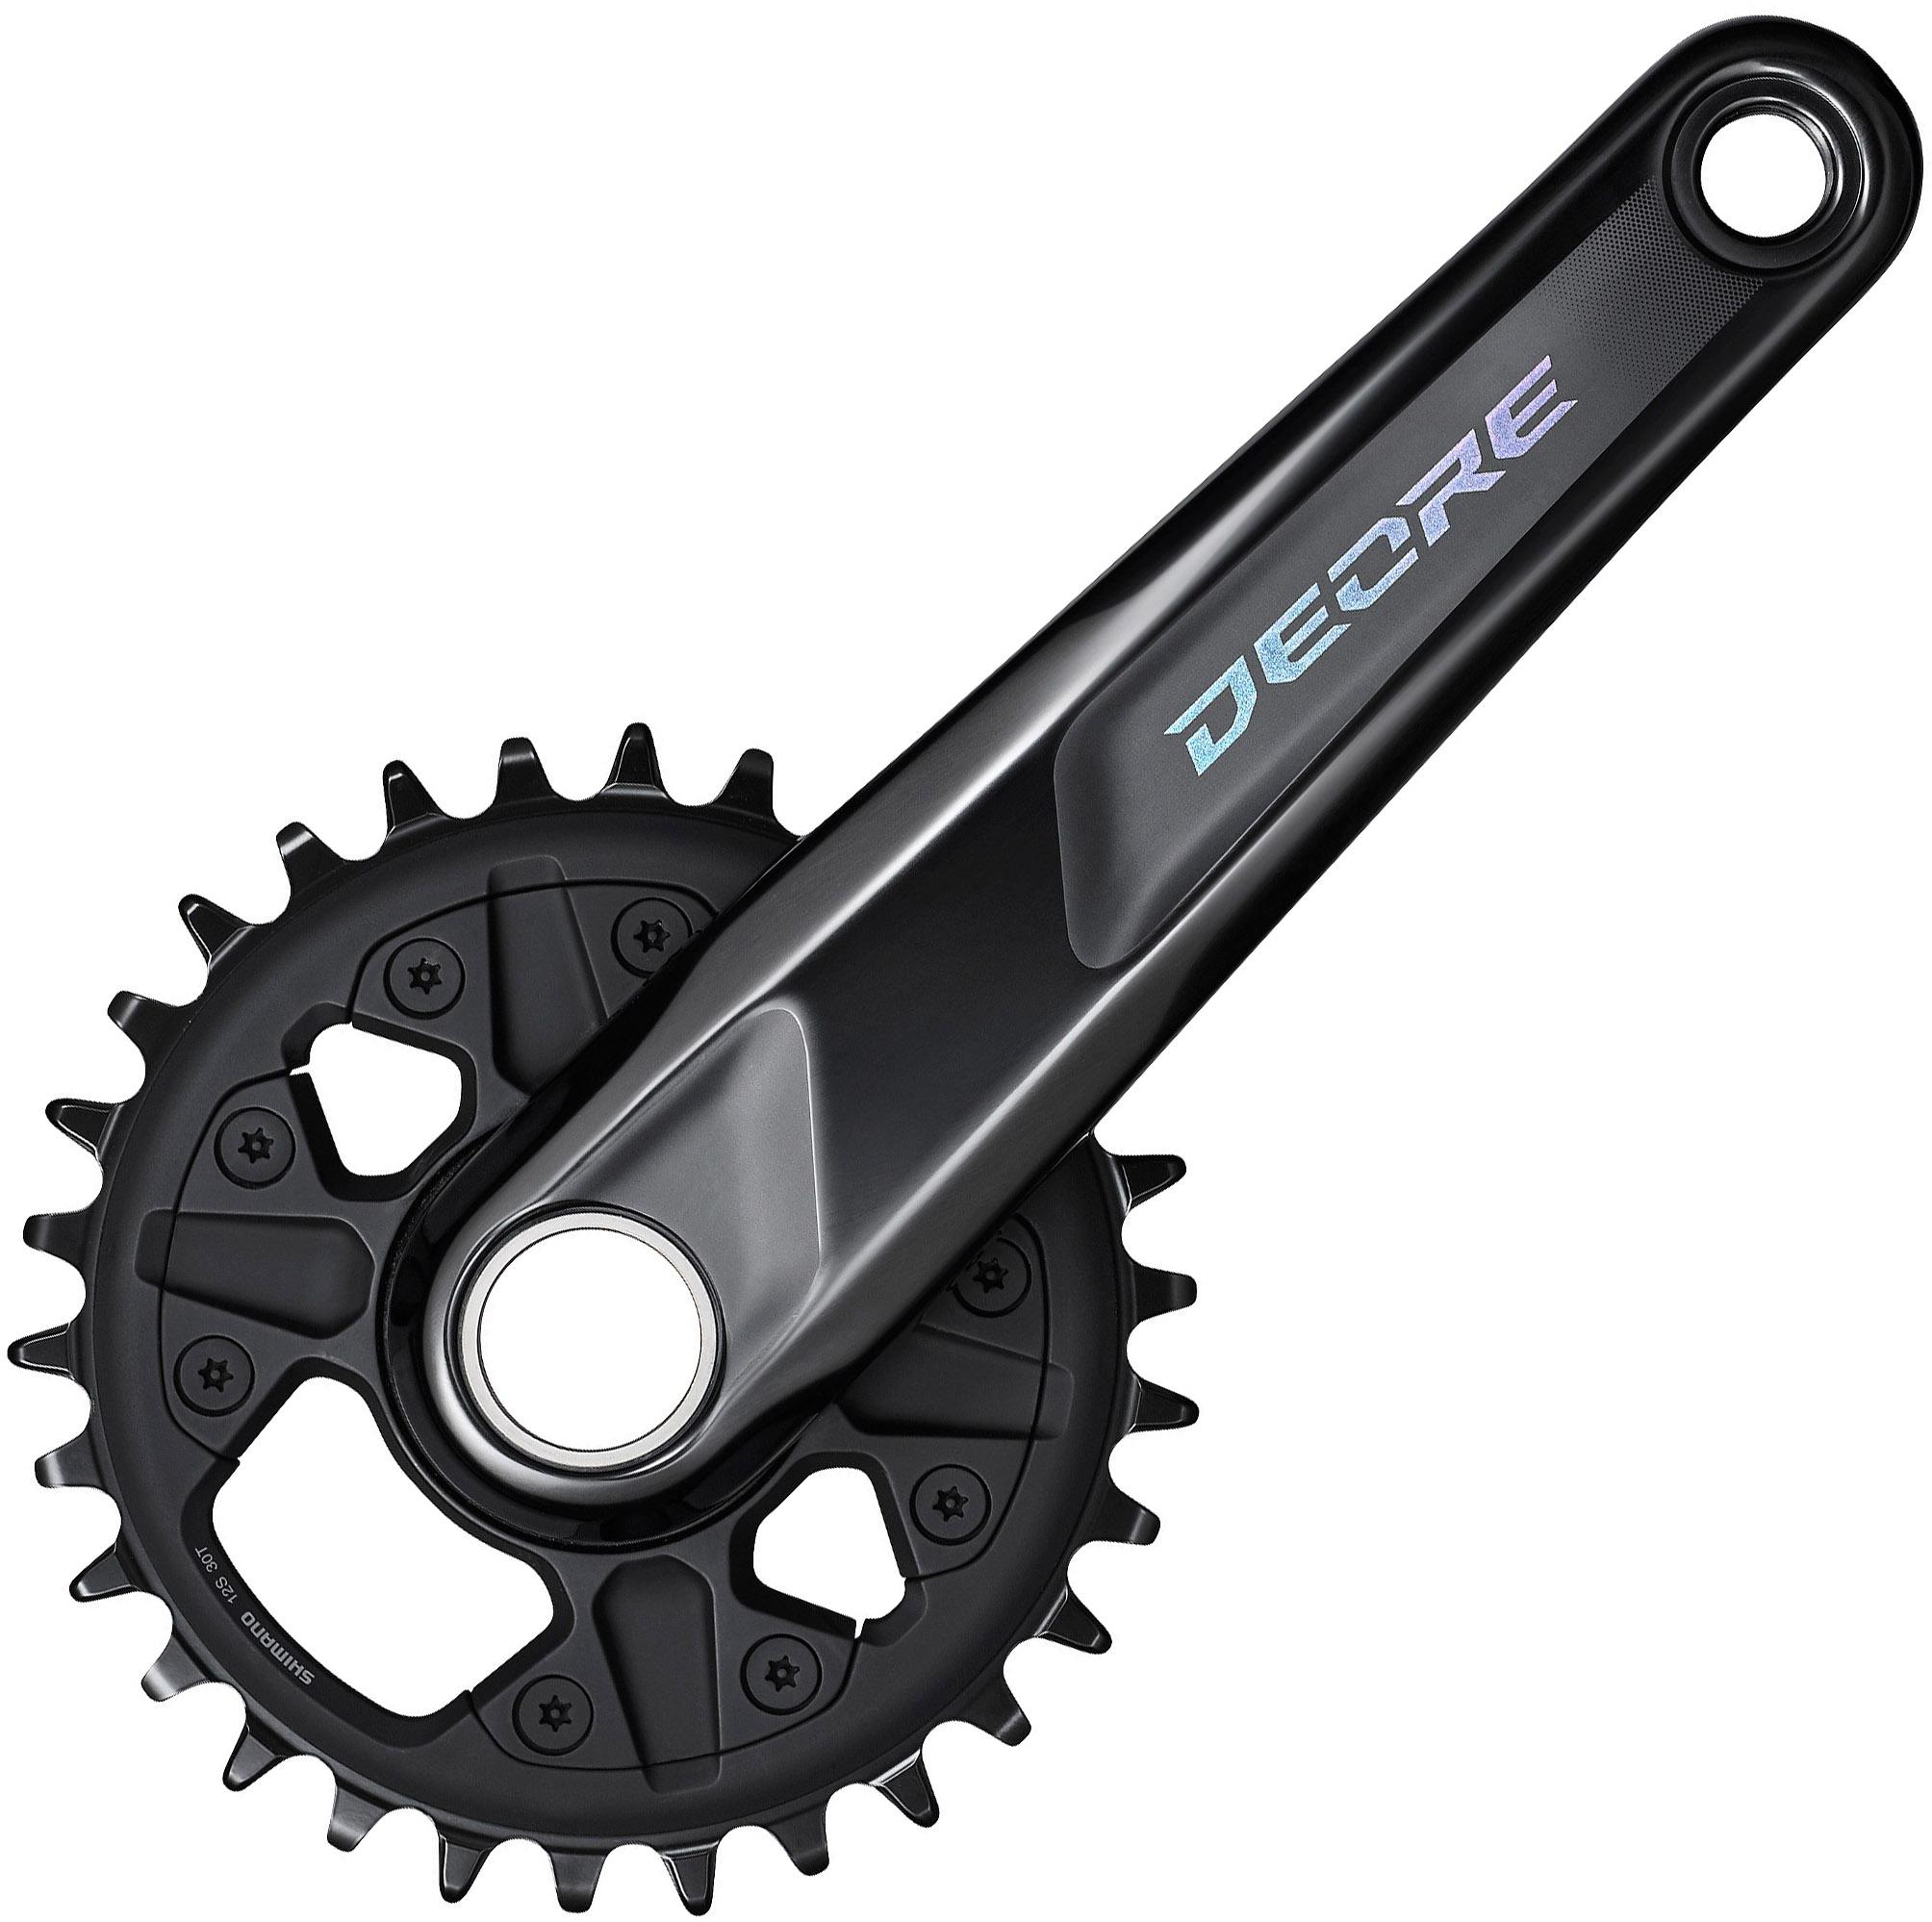 Shimano Deore M6130 Super Boost 12 Speed Chainset - Black